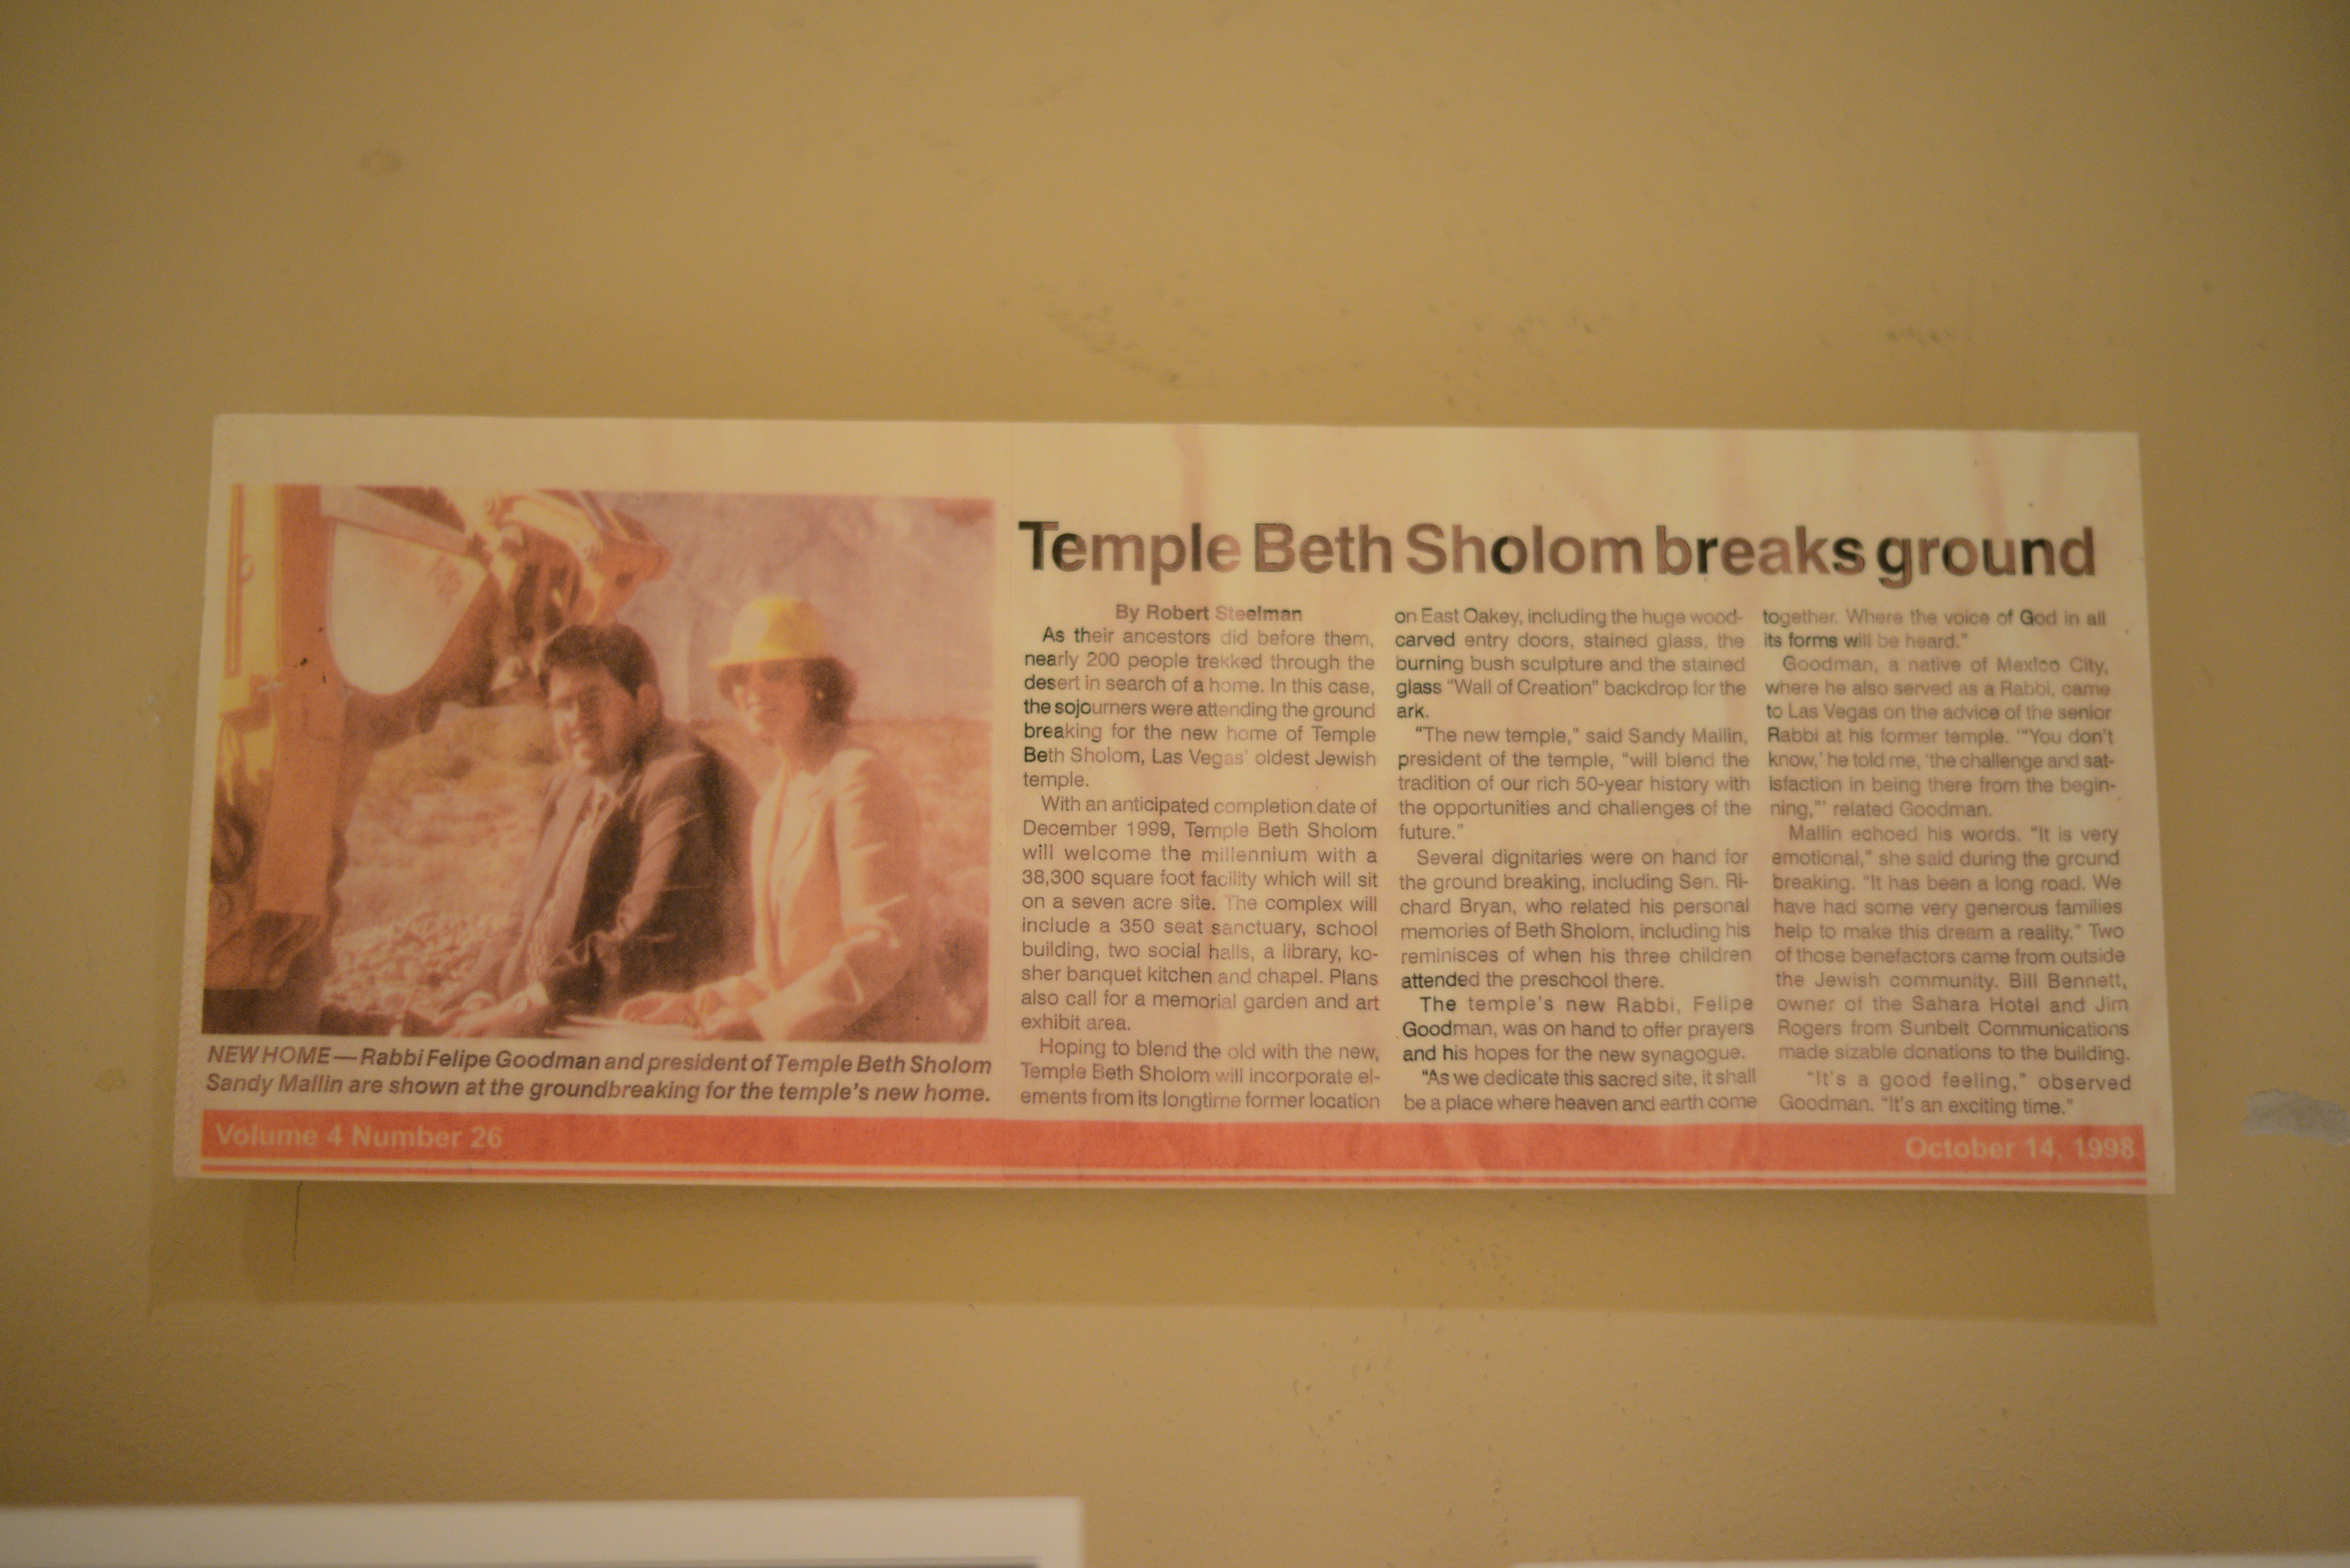 Photograph of newspaper clipping, Temple Beth Sholom breaks ground, publication unknown, October 14, 1998